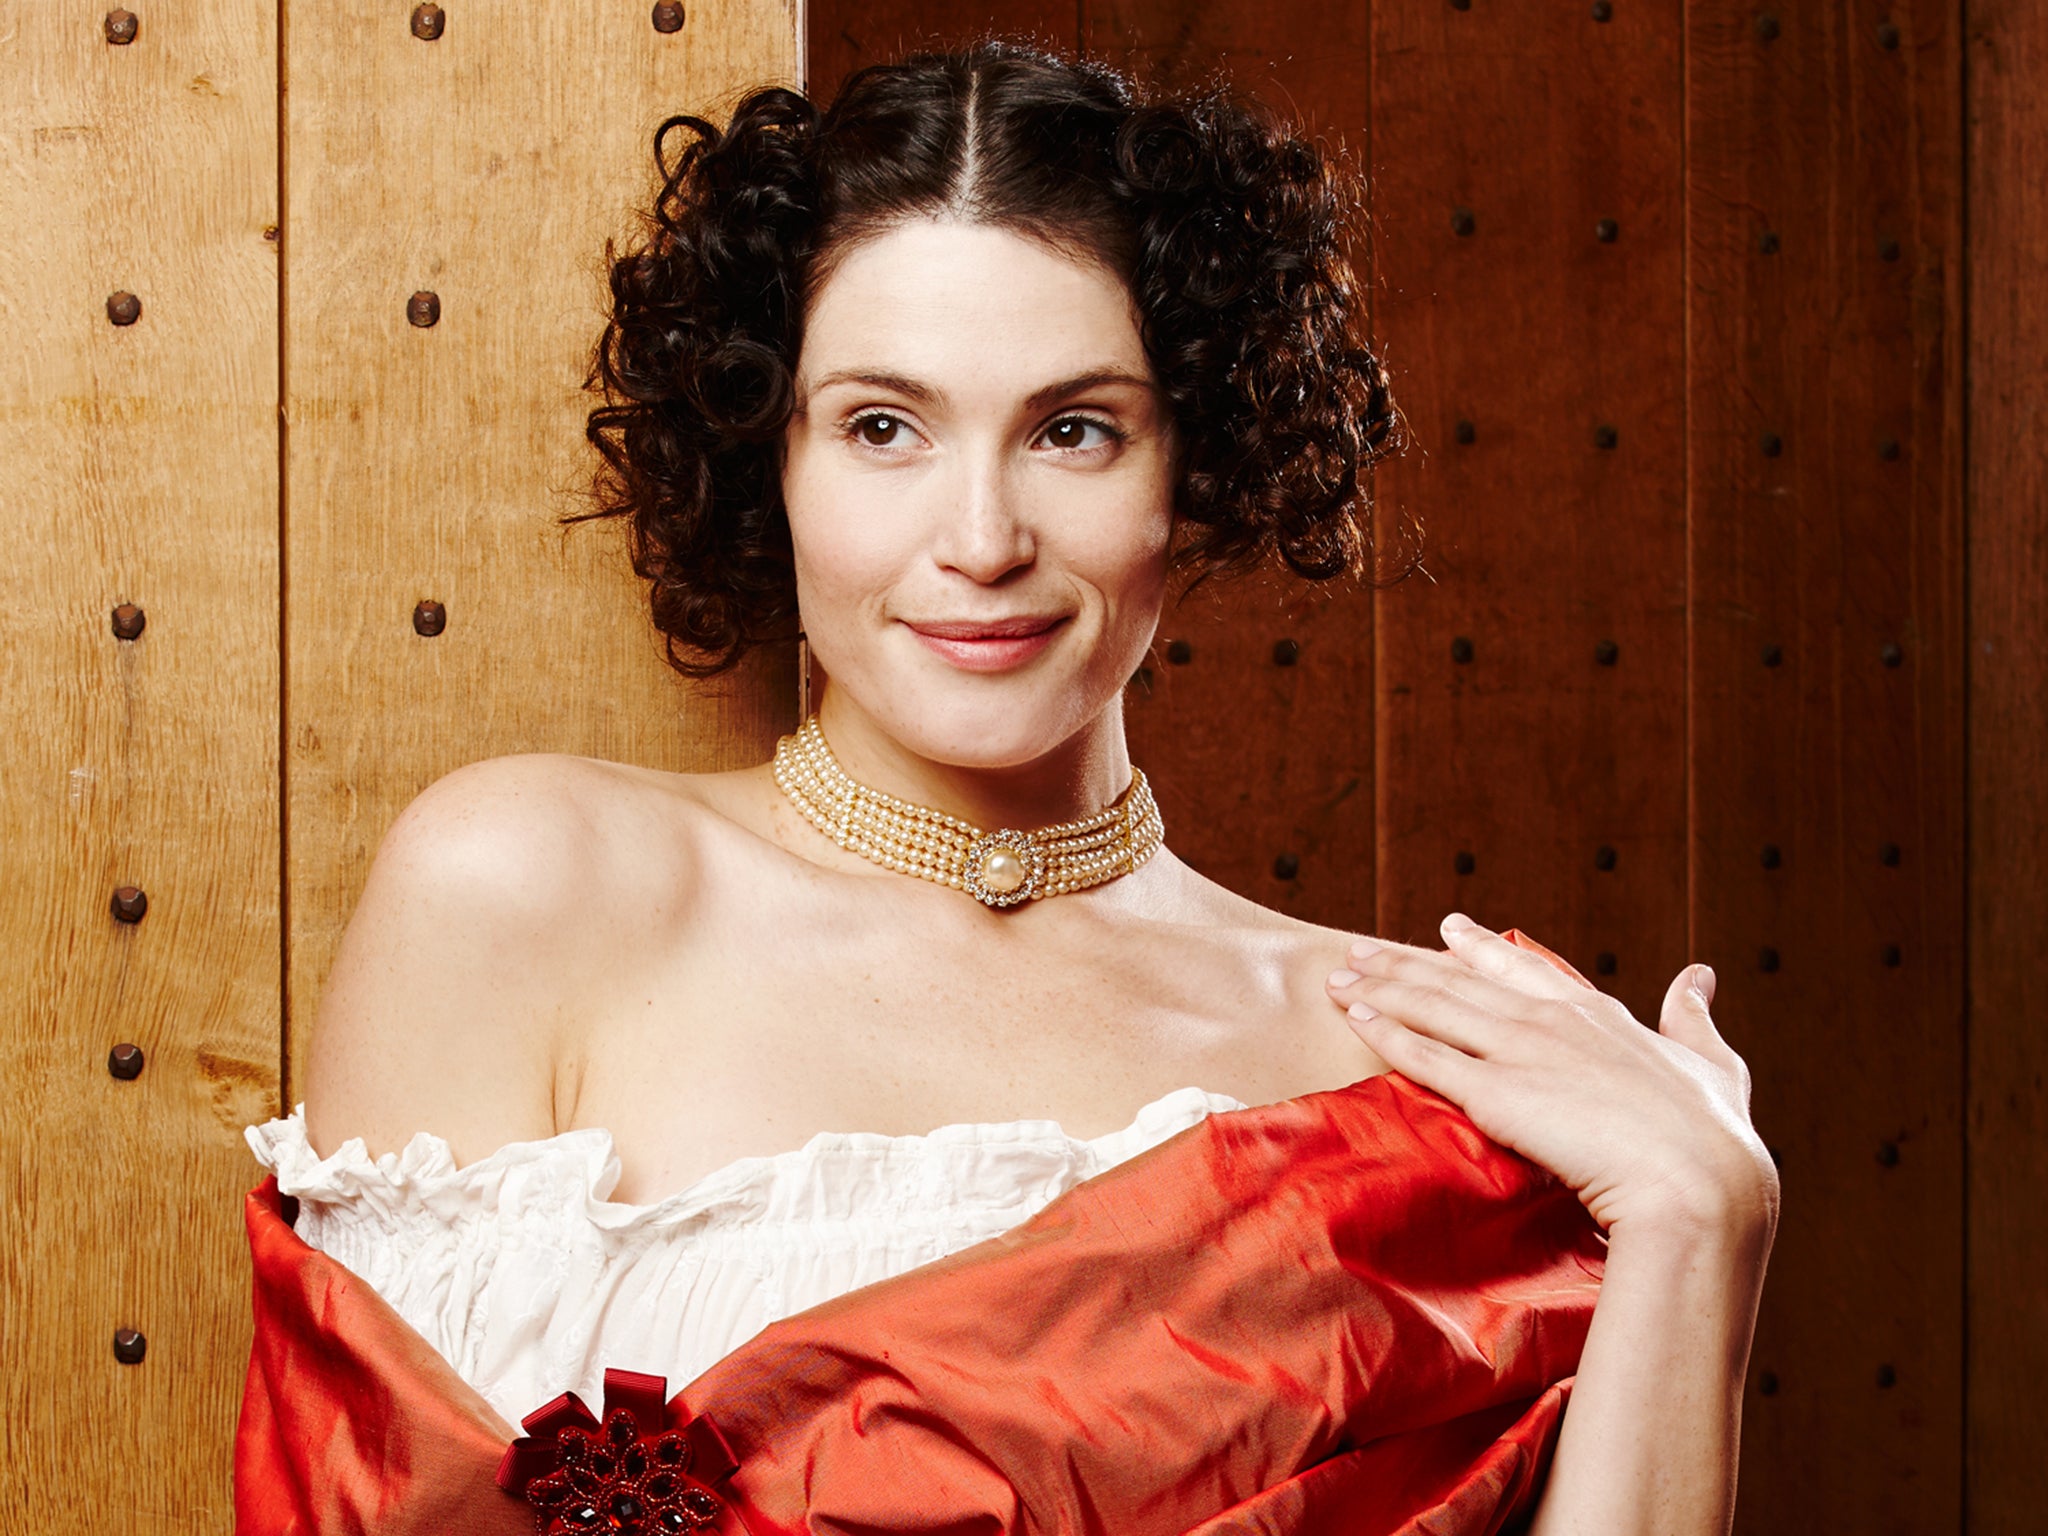 &#13;
Gemma Arterton is up for Best Actress in a Play for her performance as Nell Gwynn&#13;